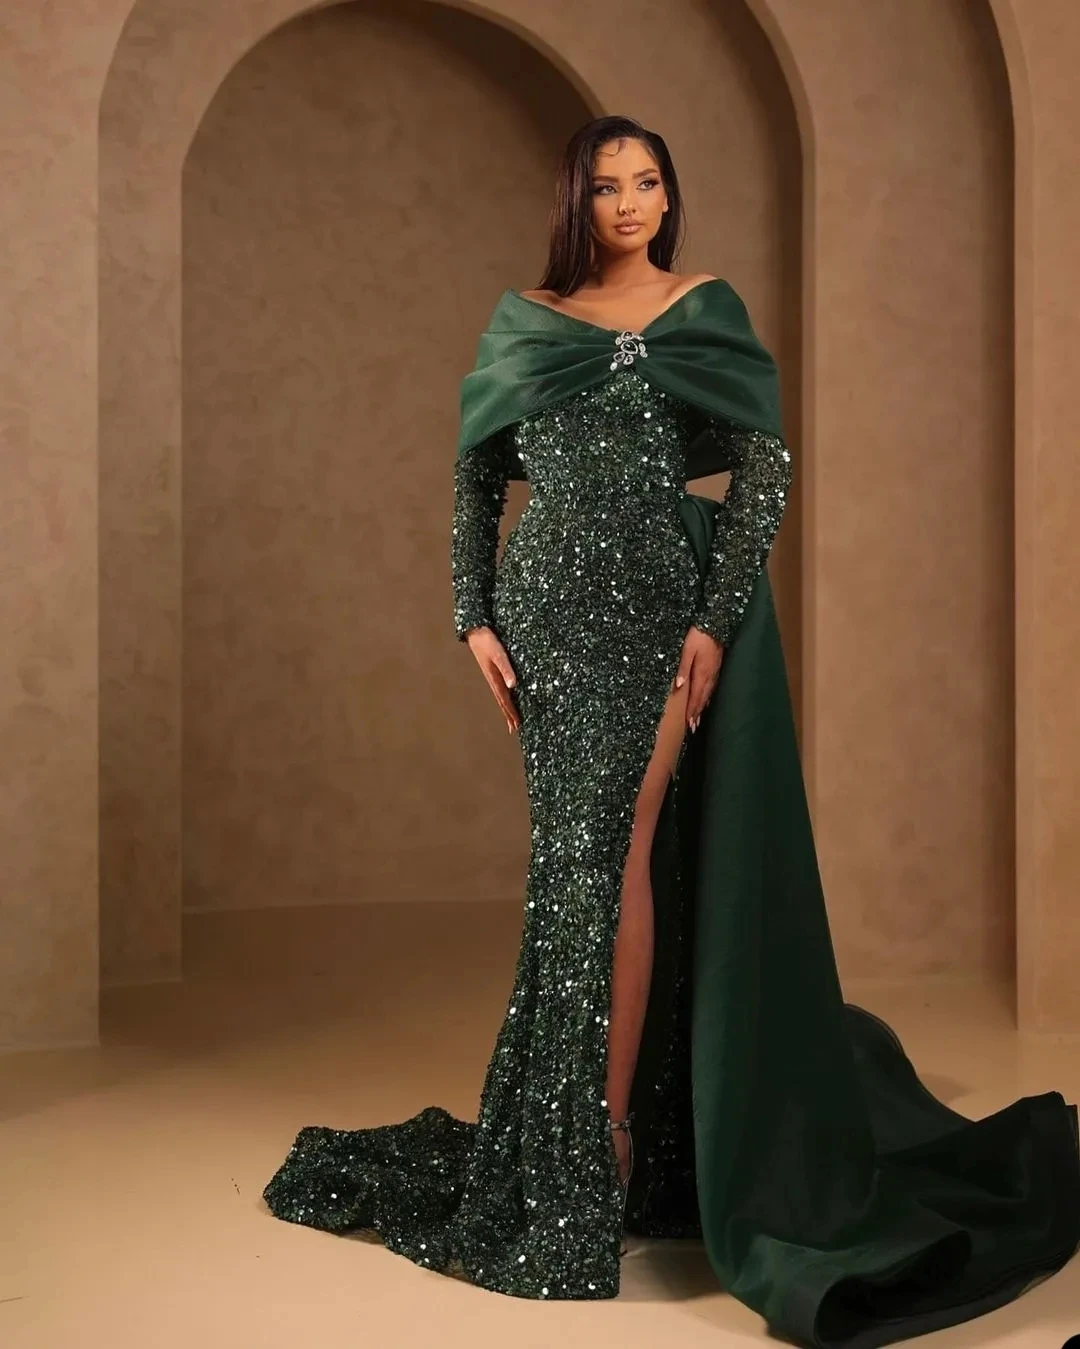 

Luxury Hunter Green Party Dresses Celebrity Side High Split Evening Dresses Sexy Sequined Prom Gown Dubai Arabic Robe De Soiree